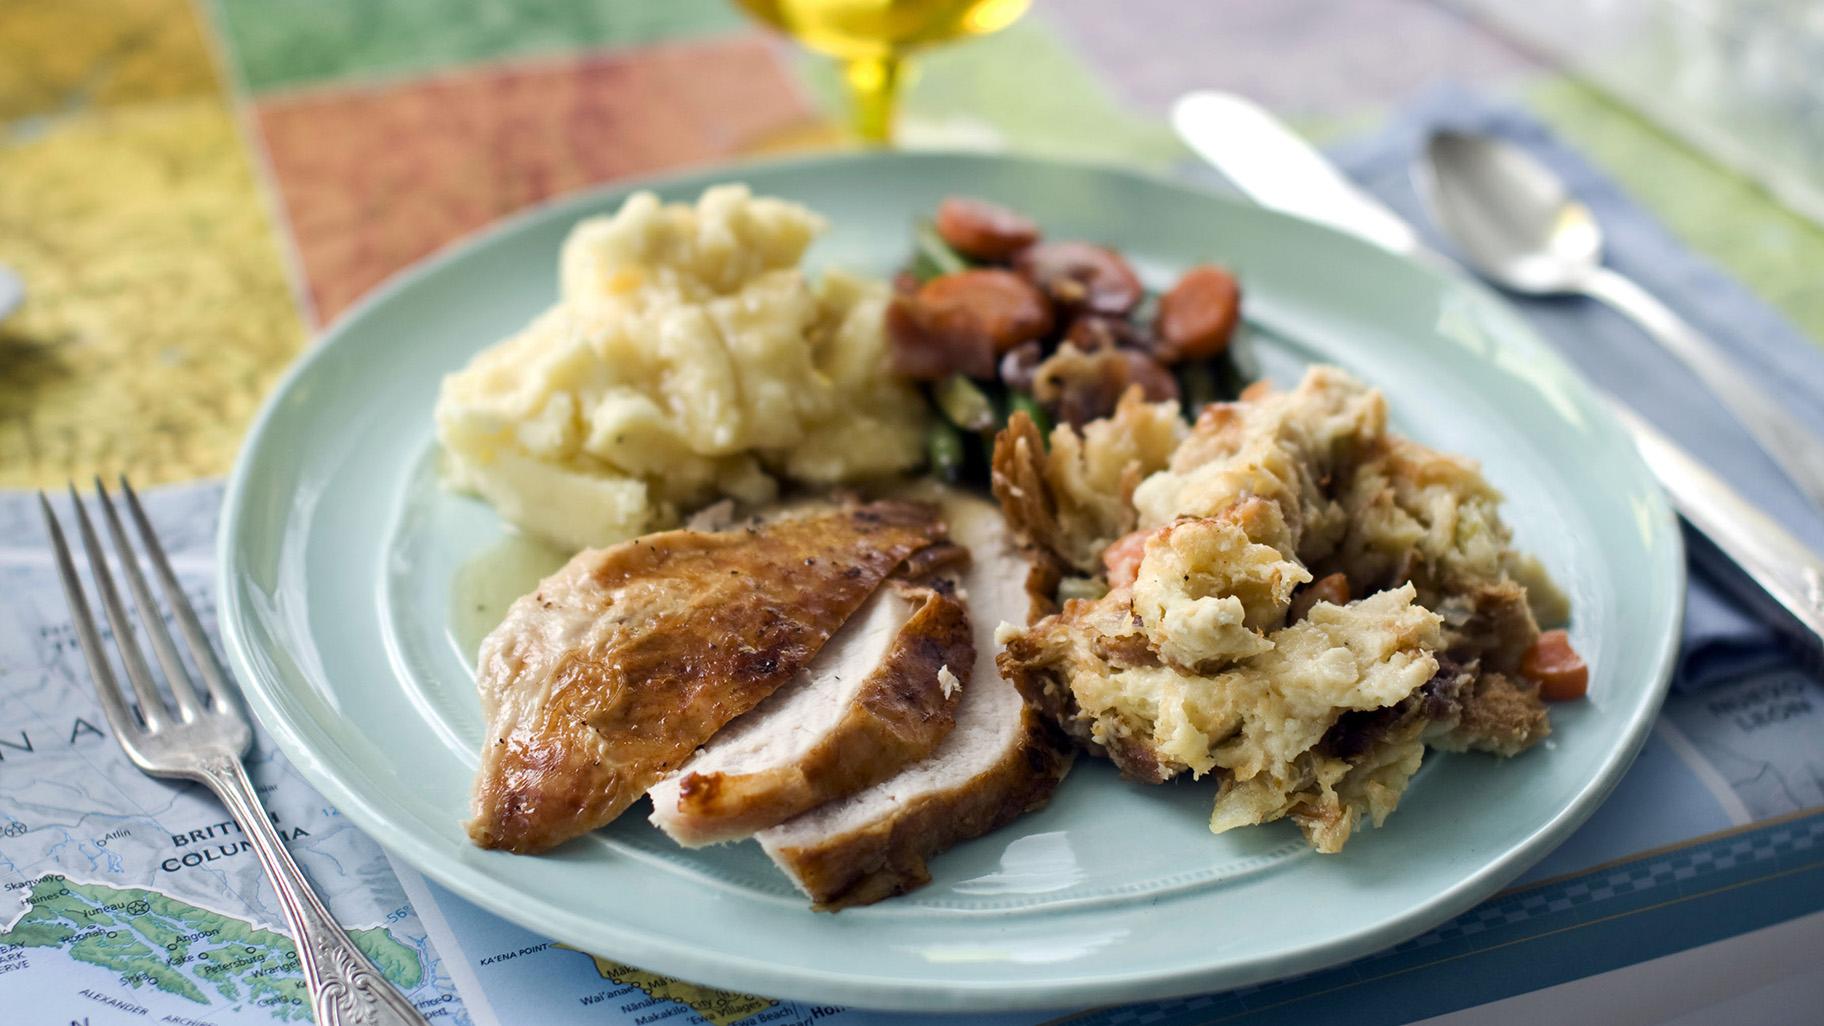 A plate of roasted turkey and gravy, stuffing, mashed potatoes, and glazed carrots appears in Concord, N.H., on Oct. 2, 2012. (AP Photo / Matthew Mead, File)